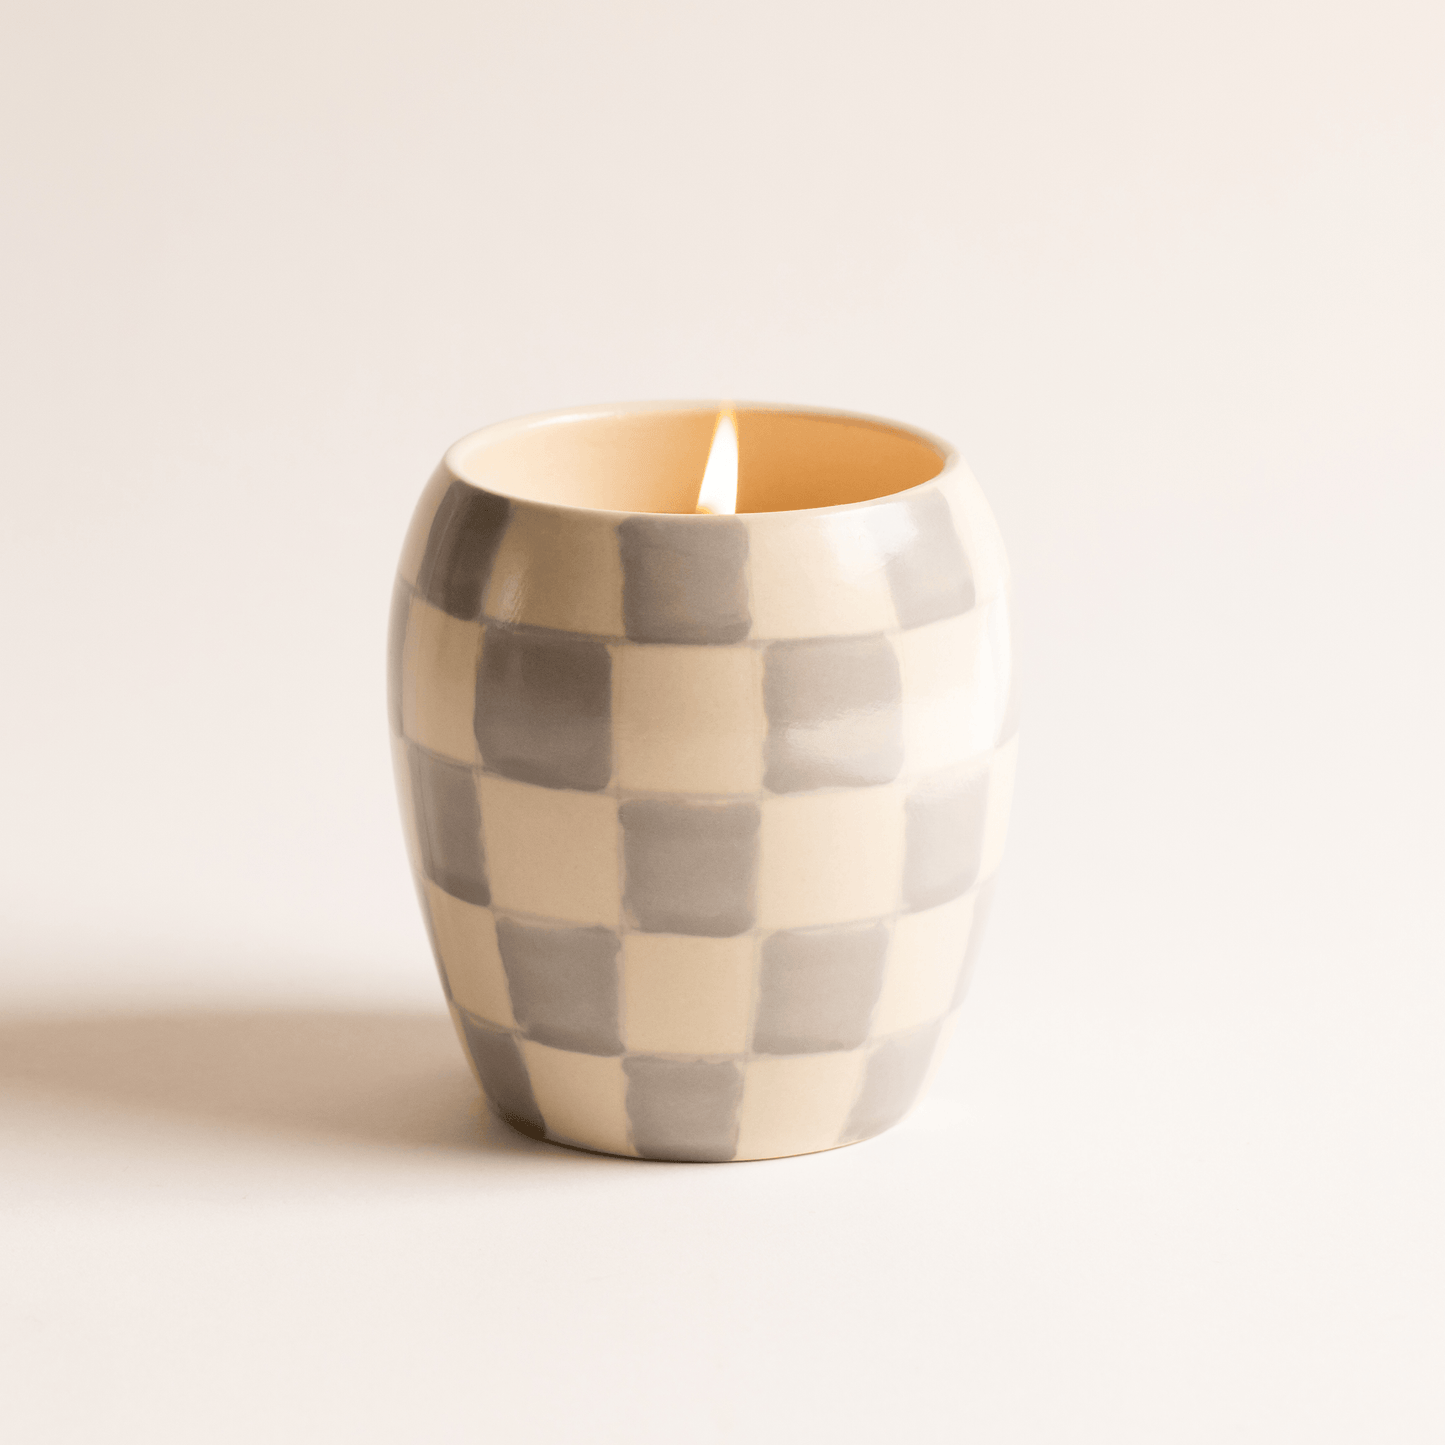 11 oz ceramic vessel with rounded cylindrical shape and a light blue and white checker design; one cotton wick